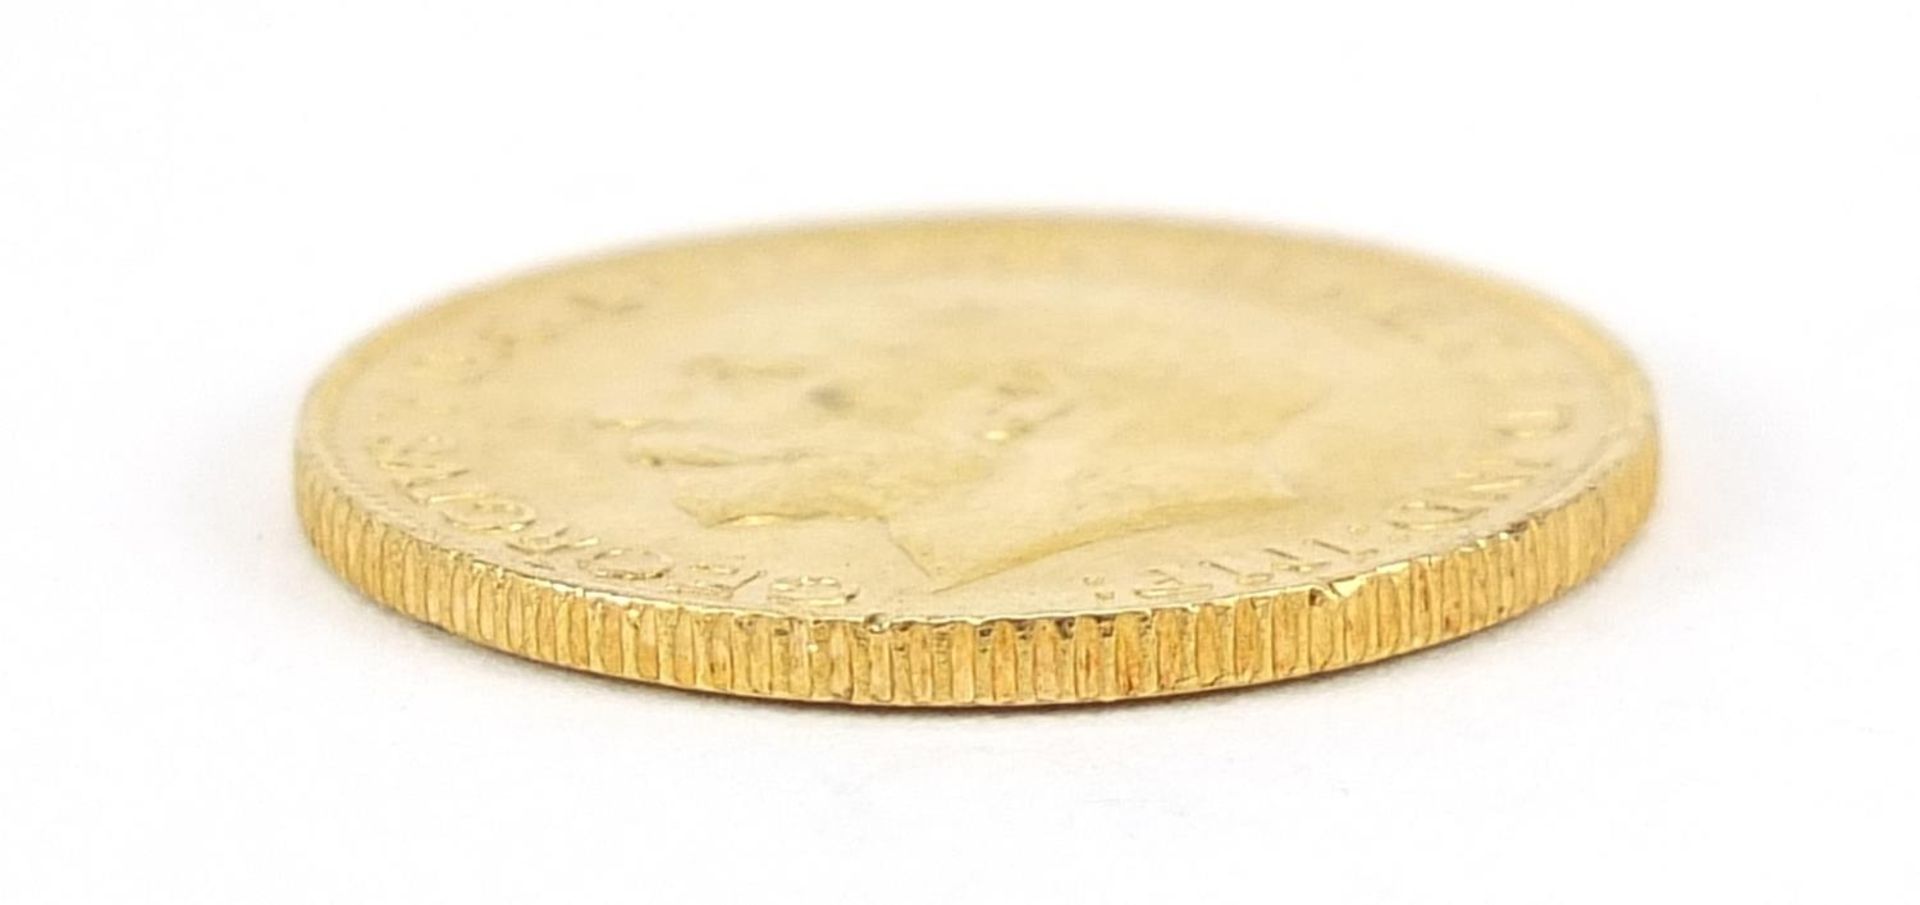 George V 1913 gold sovereign - this lot is sold without buyer?s premium, the hammer price is the - Image 3 of 3